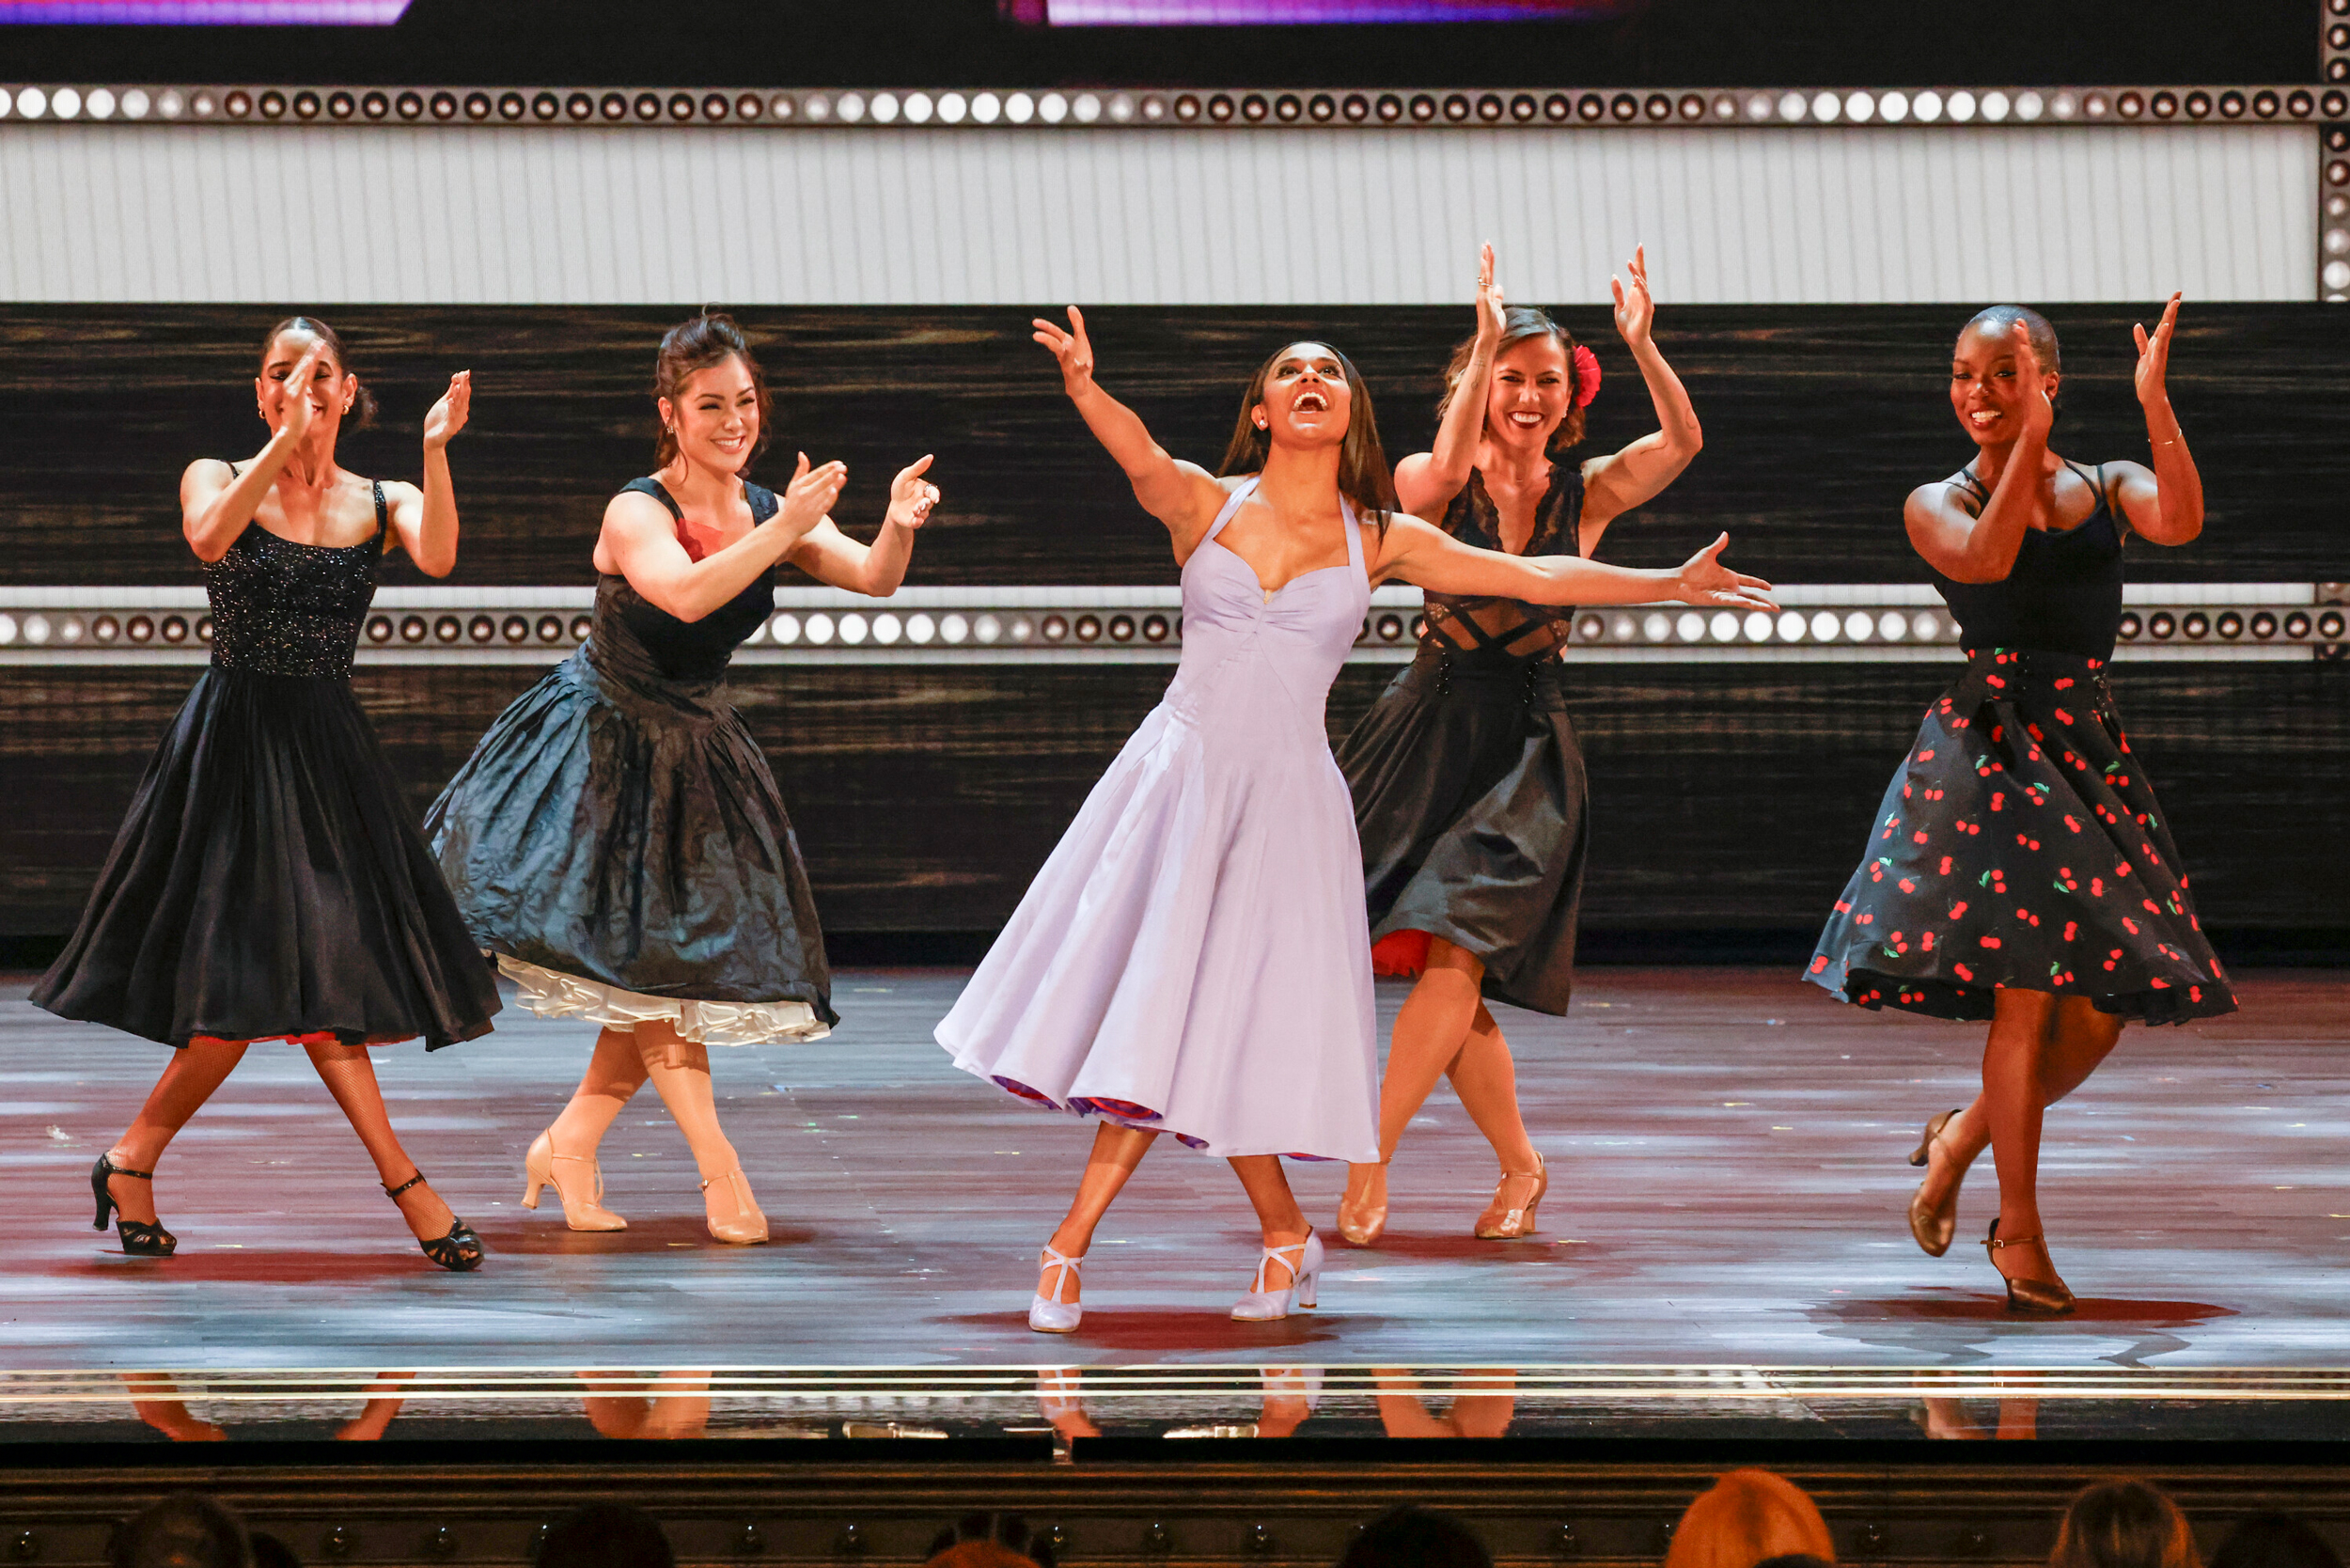 DeBose, in a swirly lilac dress, poses onstage in front of four other clapping dancers in similarly full-skirted black dresses.